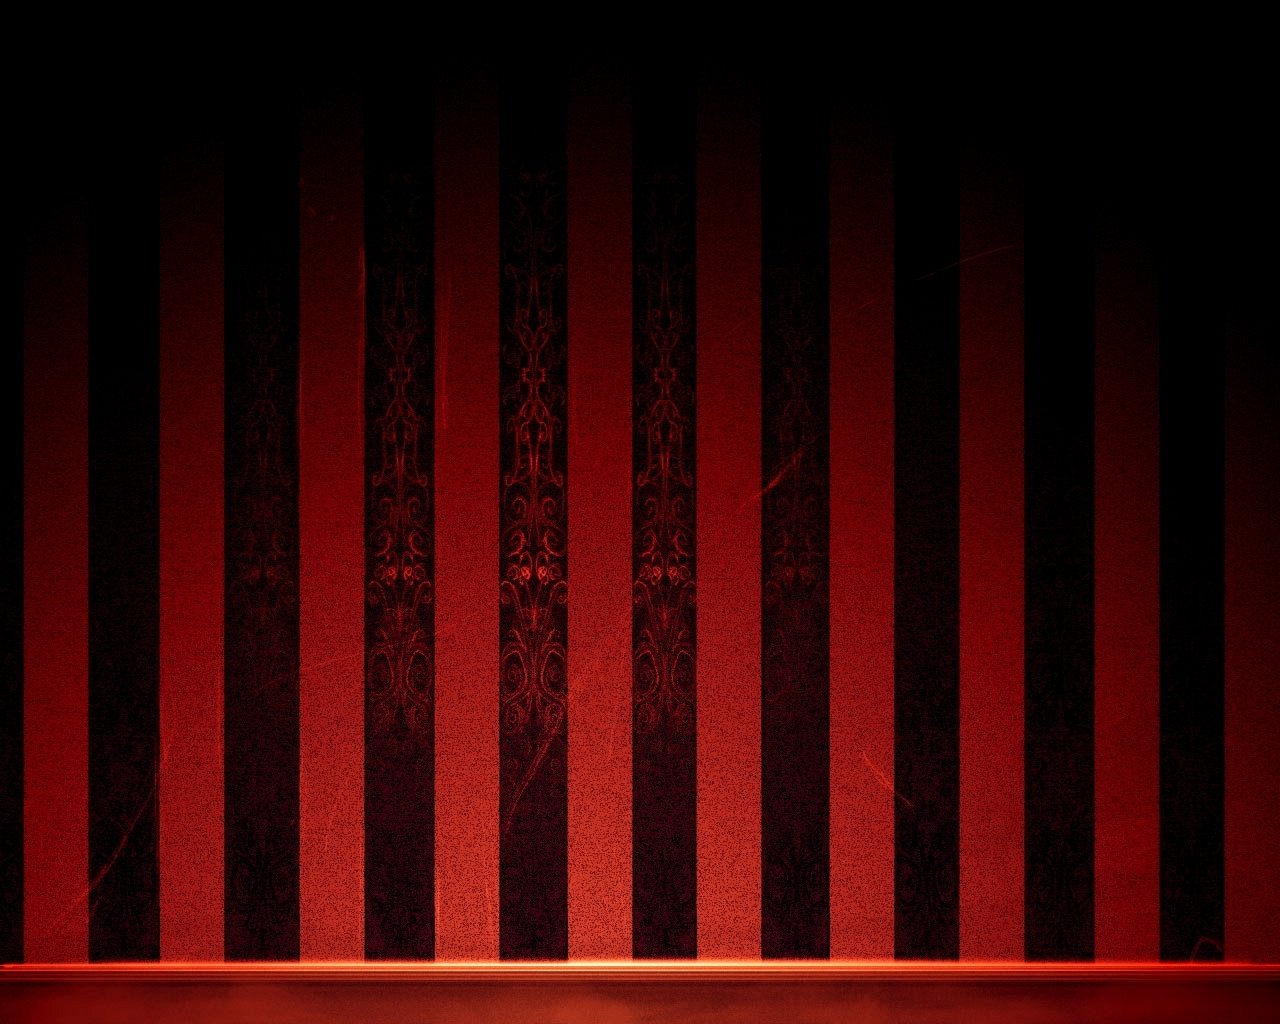 Free Stripe high quality wallpaper ID:137790 for hd 1280x1024 computer